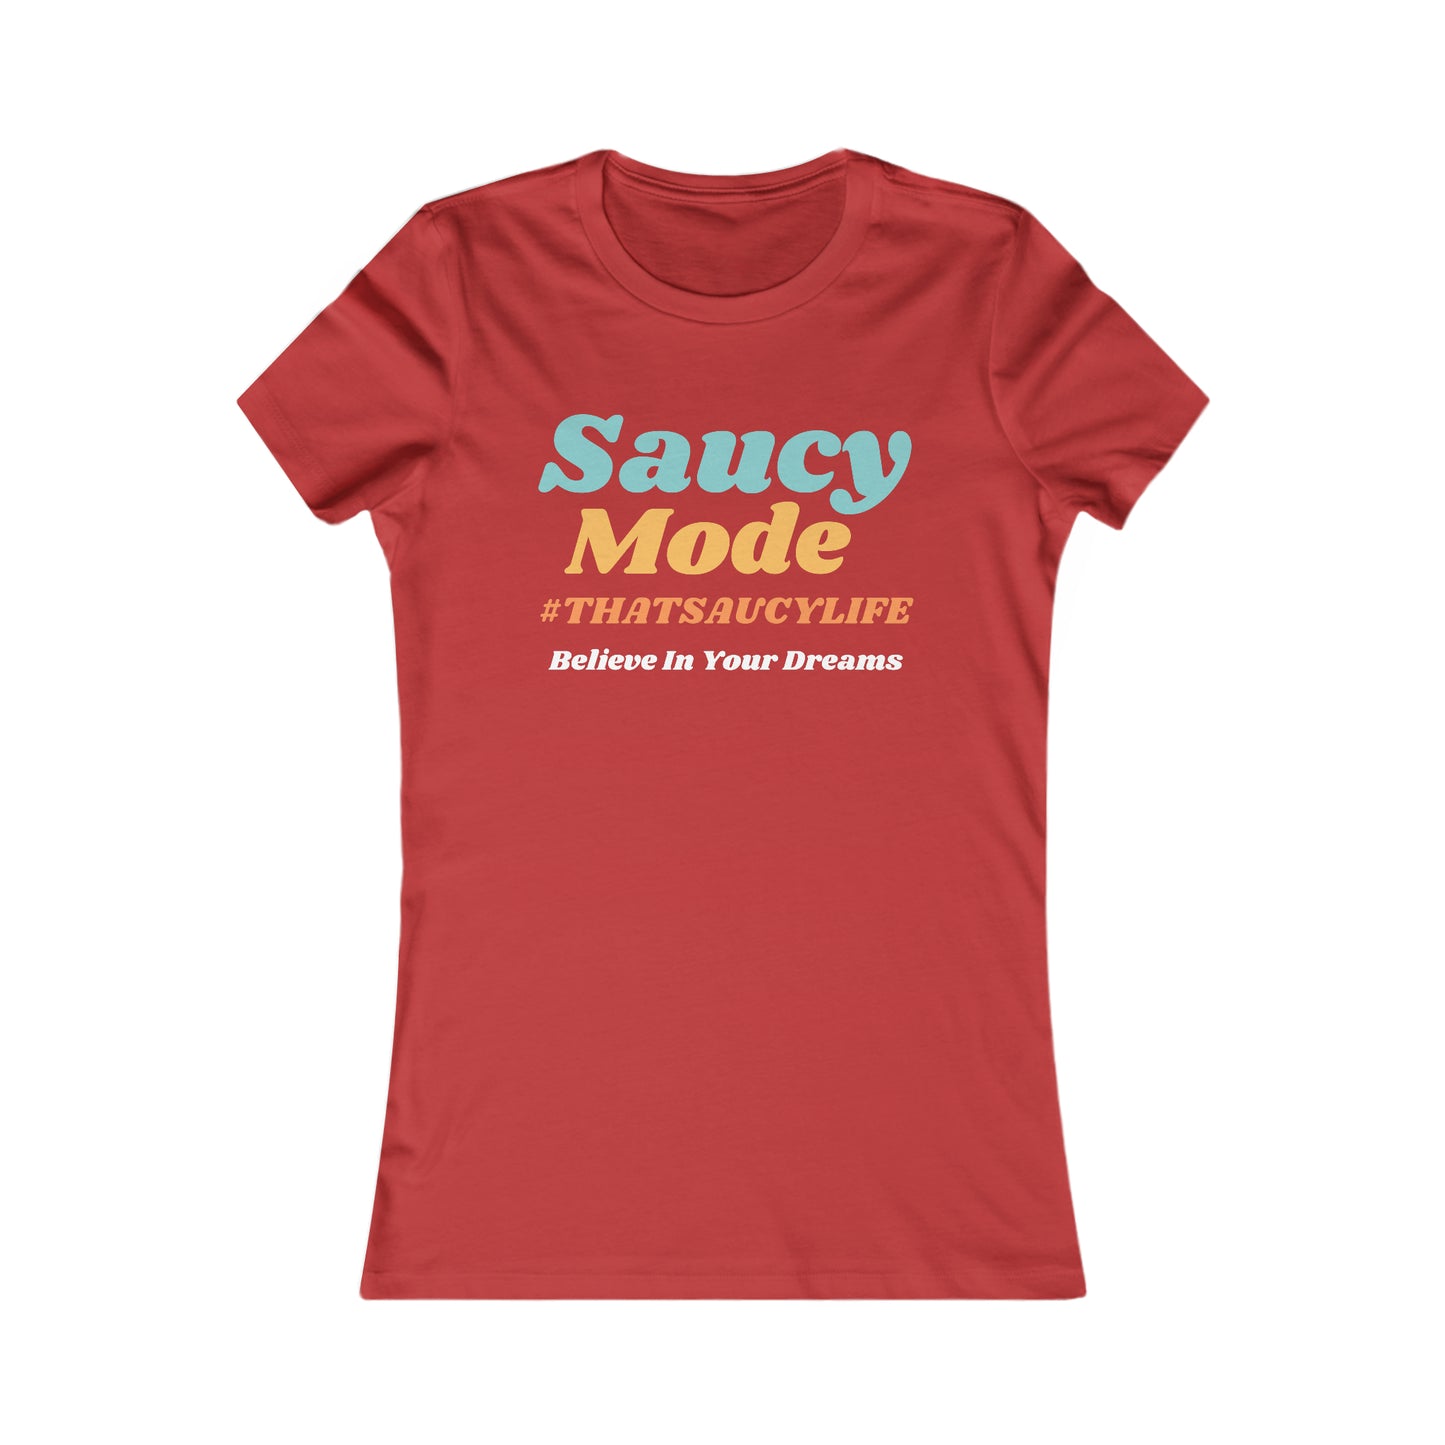 Saucy Mode #THATSAUCYLIFE Believe In Your Dreams T-Shirt Moreart